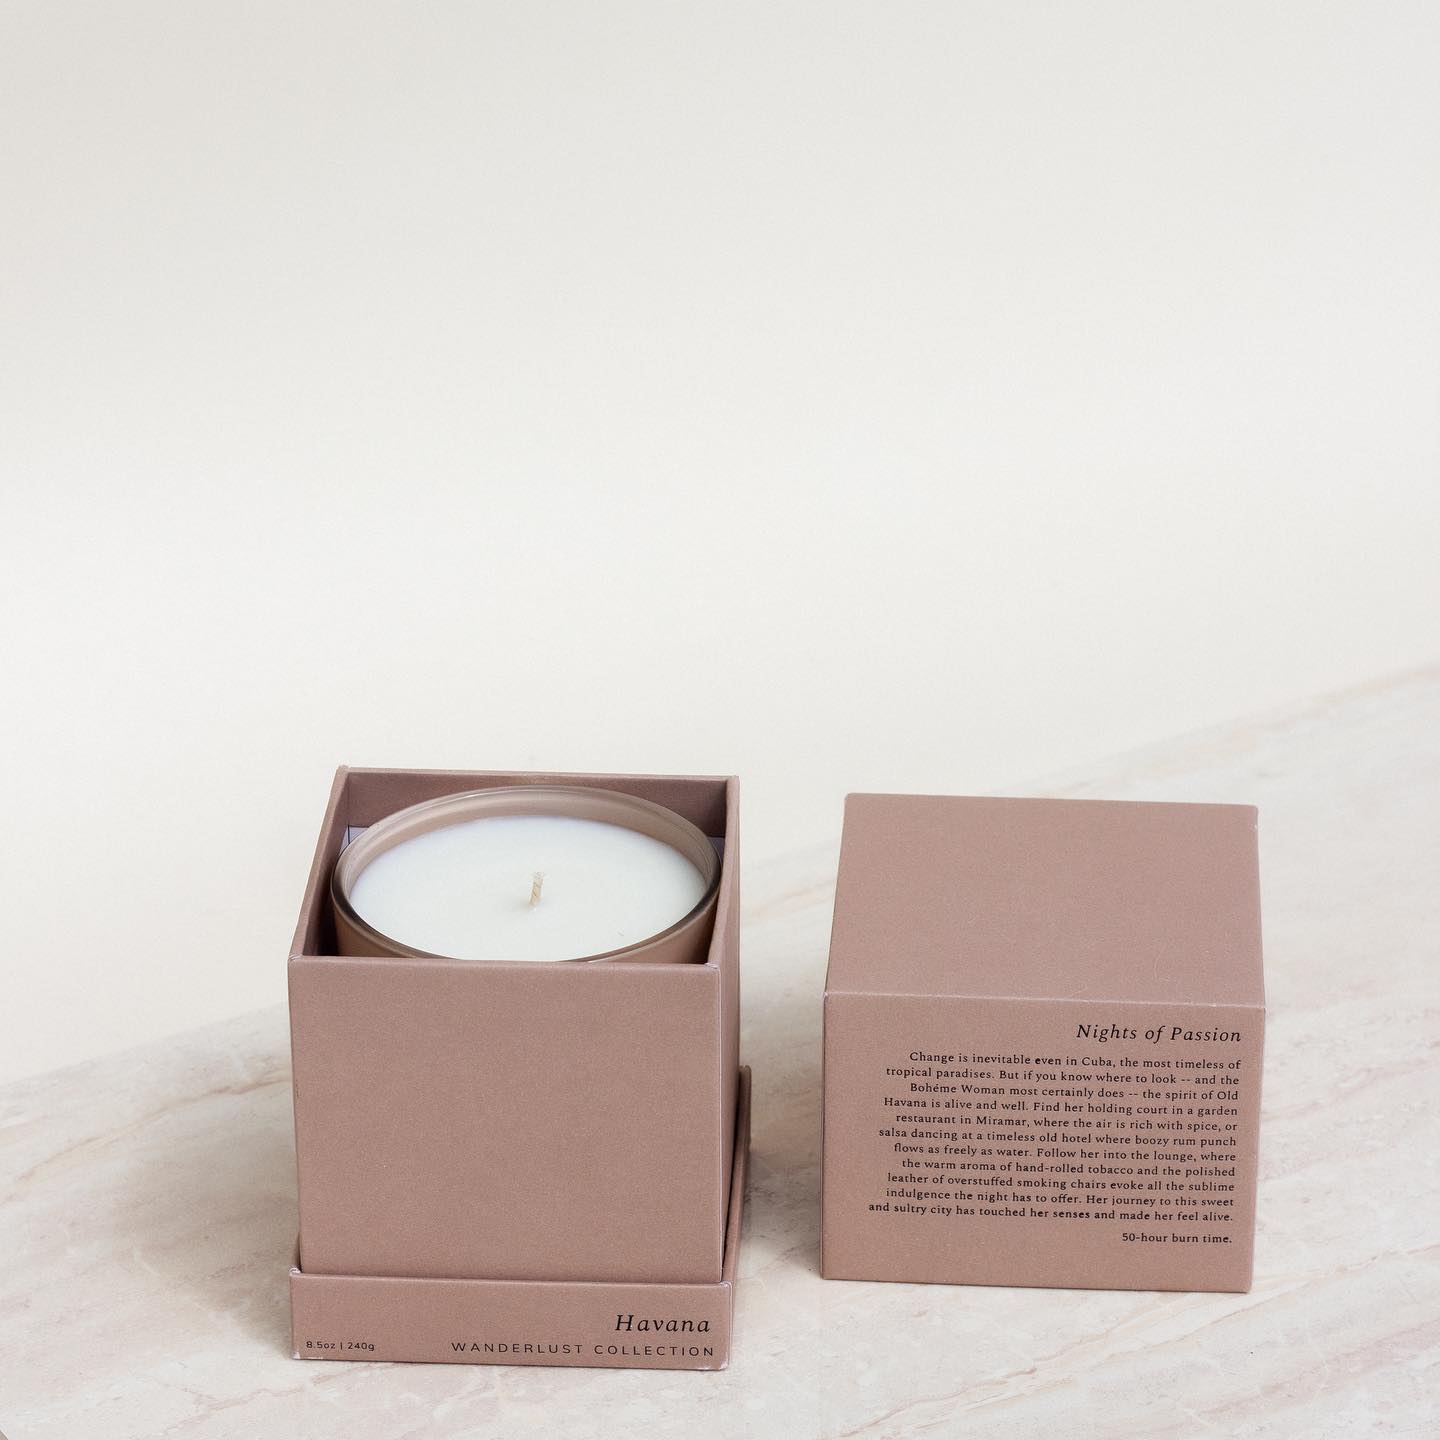 Boheme Havana Scented Candle - Osmology Scented Candles & Home Fragrance